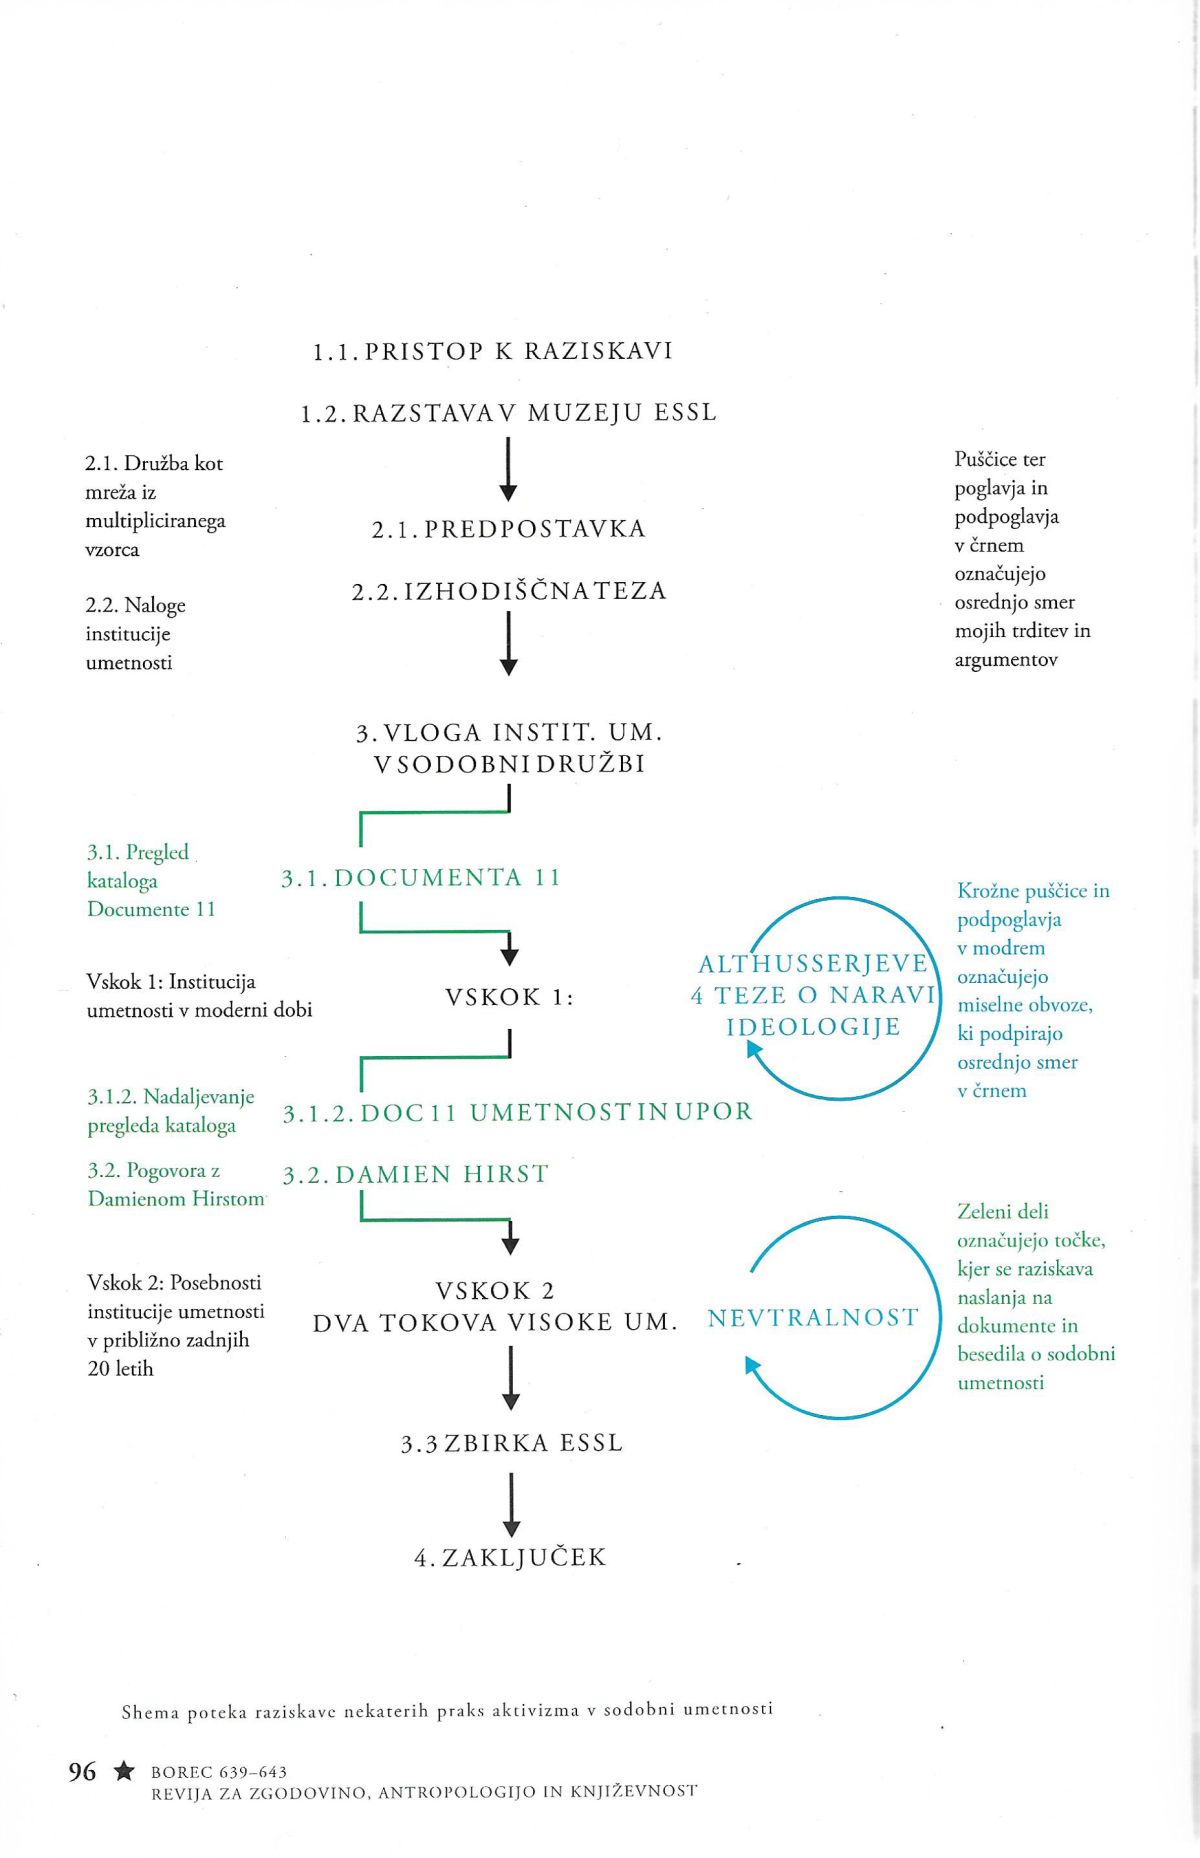 The diploma thesis in journal Borec - STRUCTURE OF THE TREATISE.